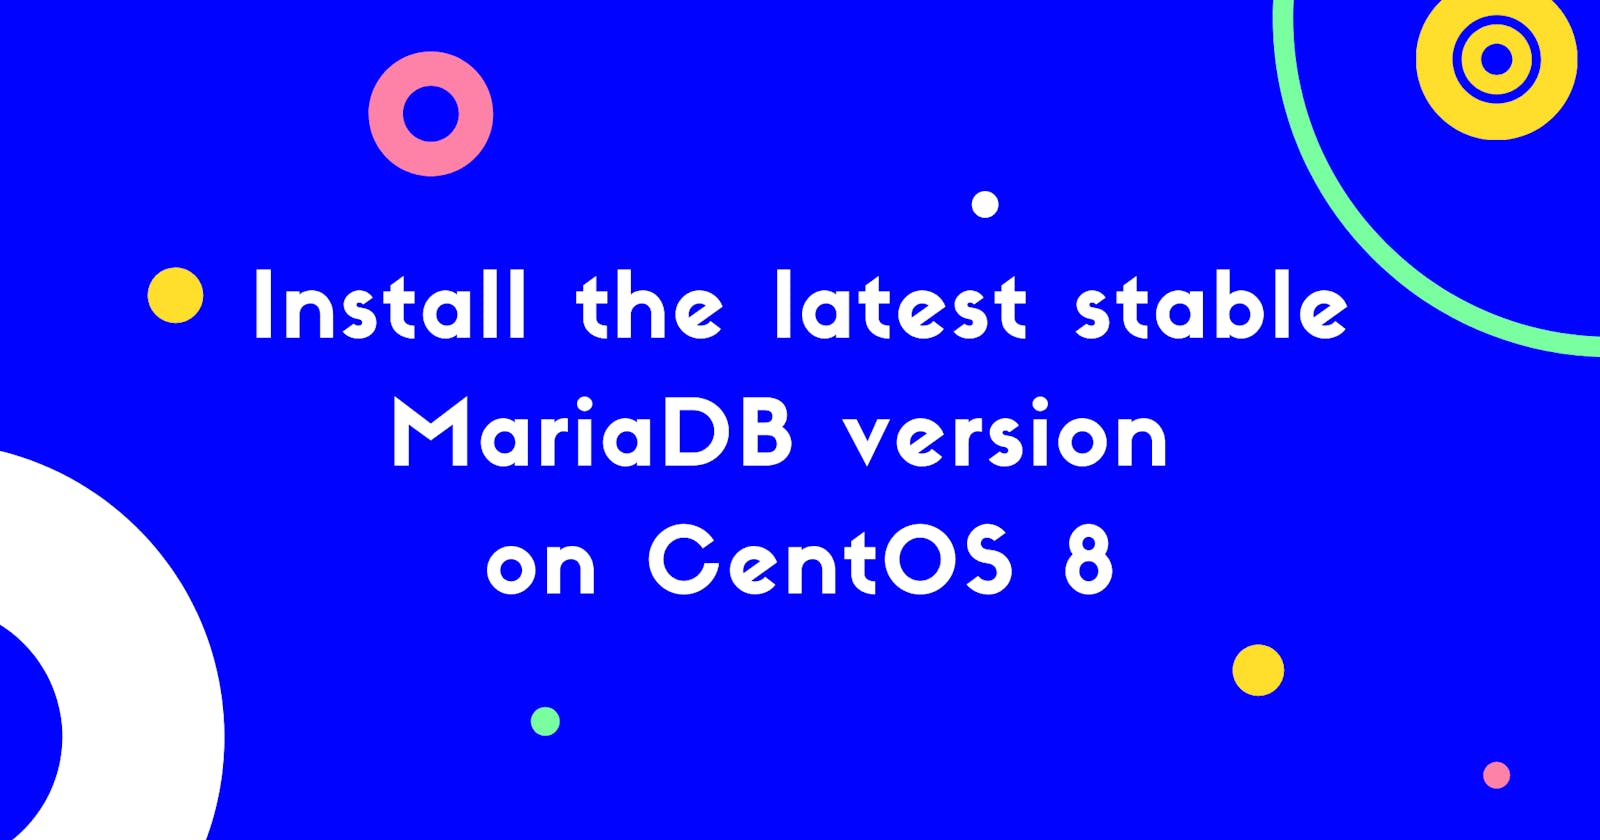 How to install the latest stable MariaDB version on CentOS 8?